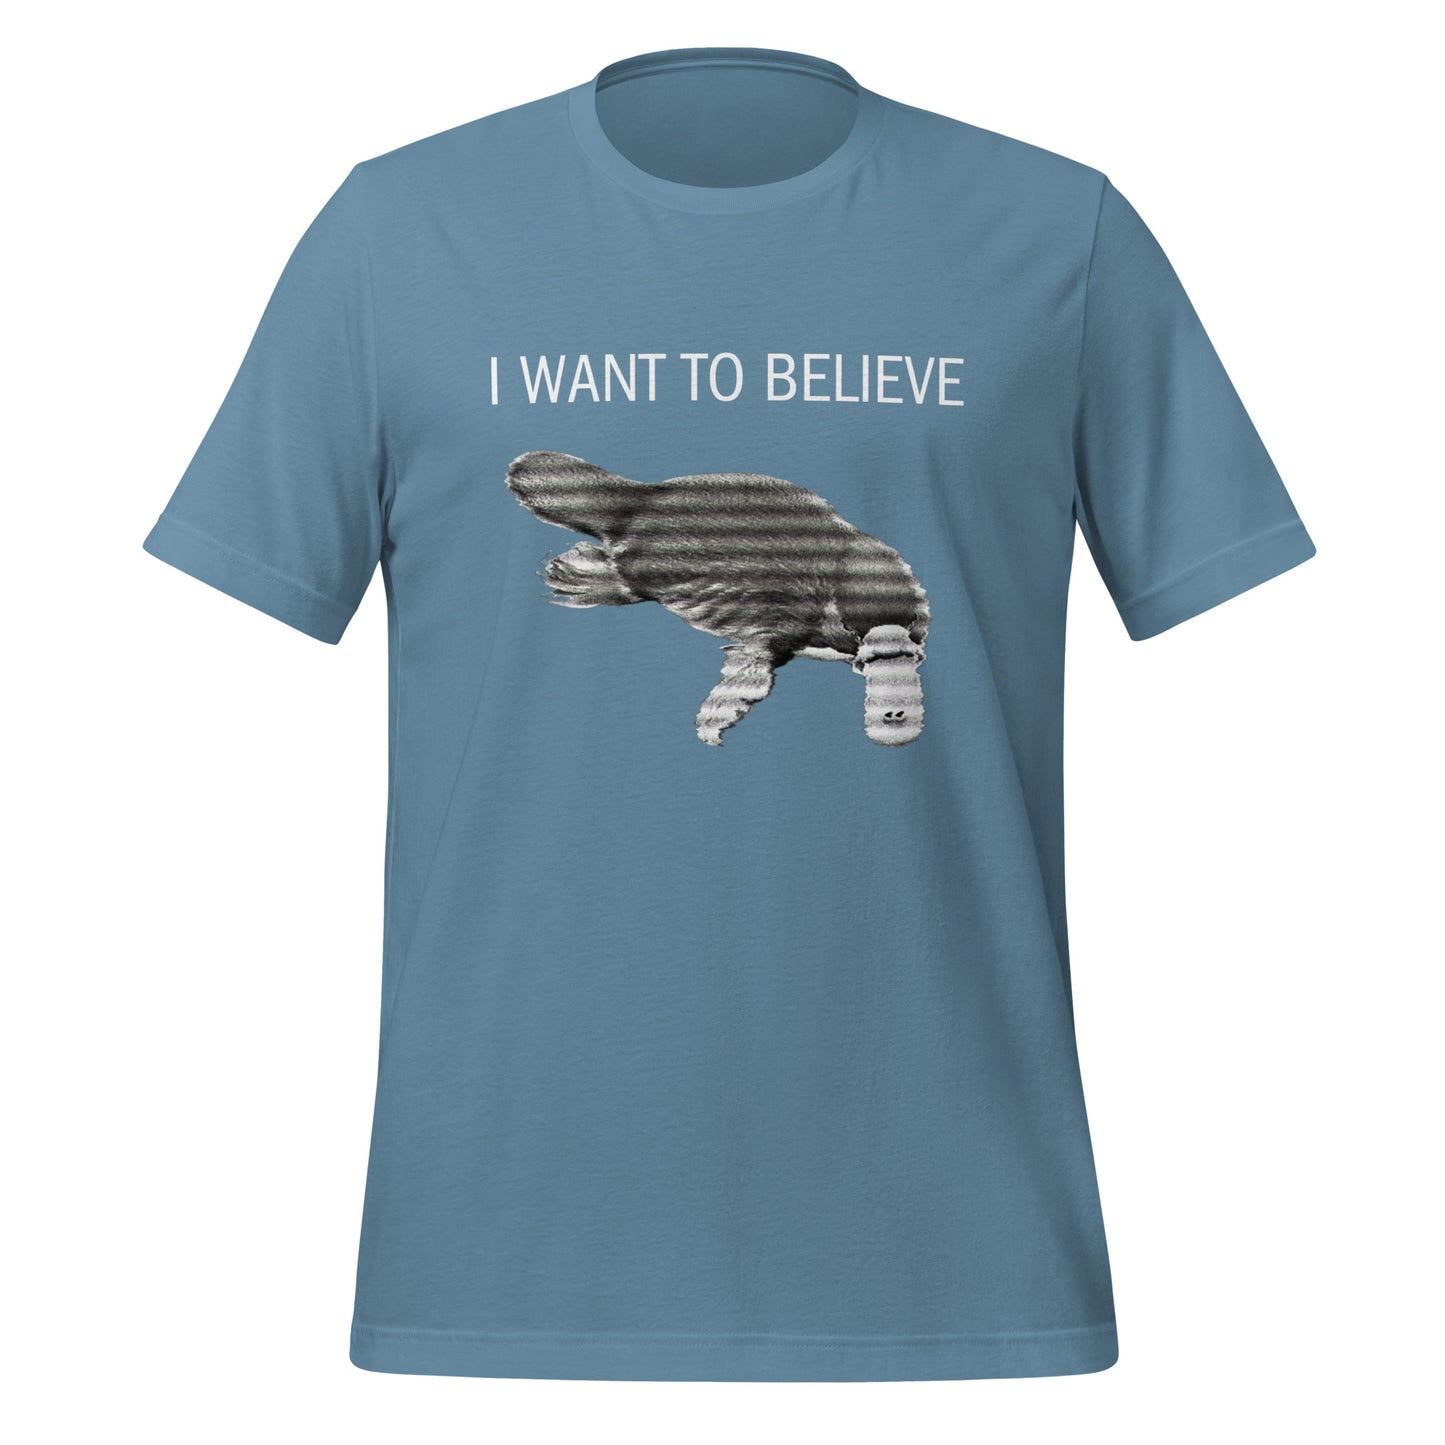 I Want To Believe - Unisex T